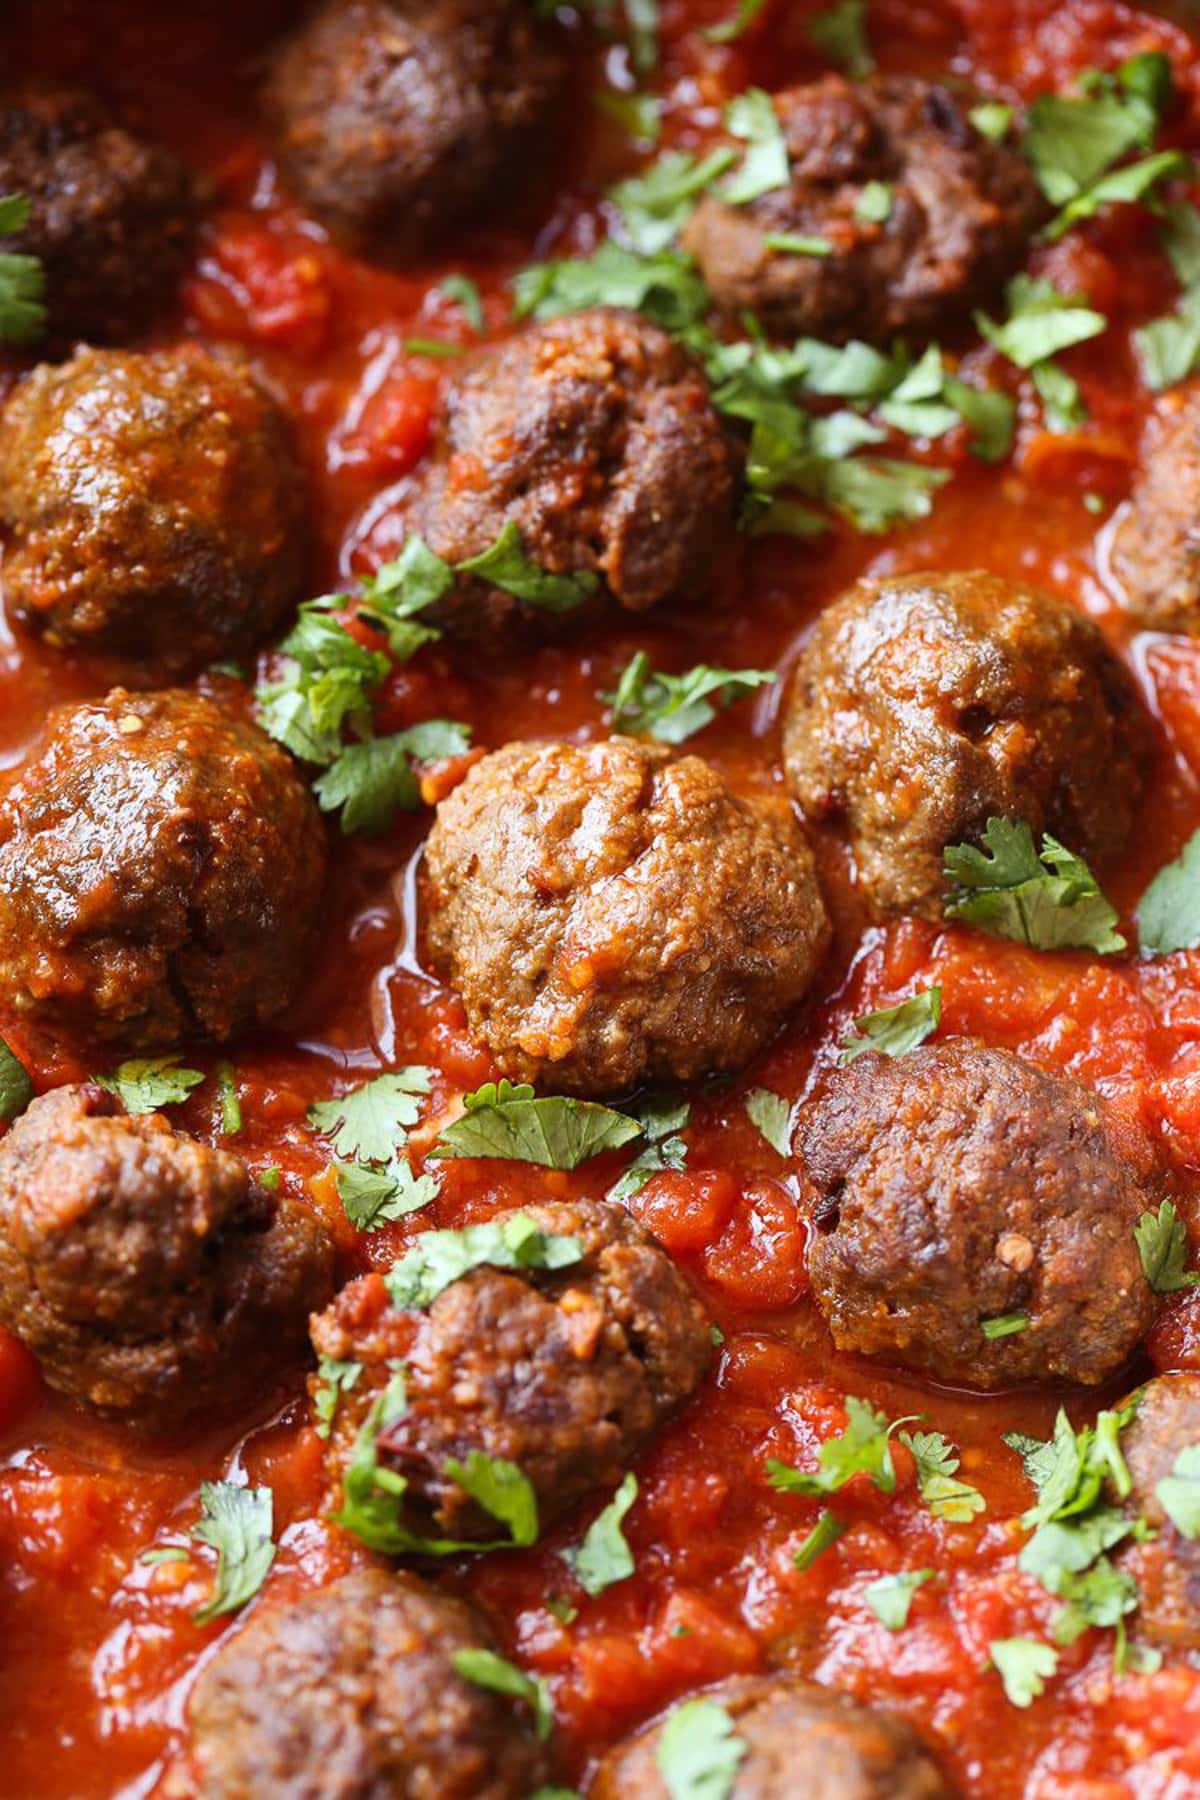 Chipotle meatballs in sauce